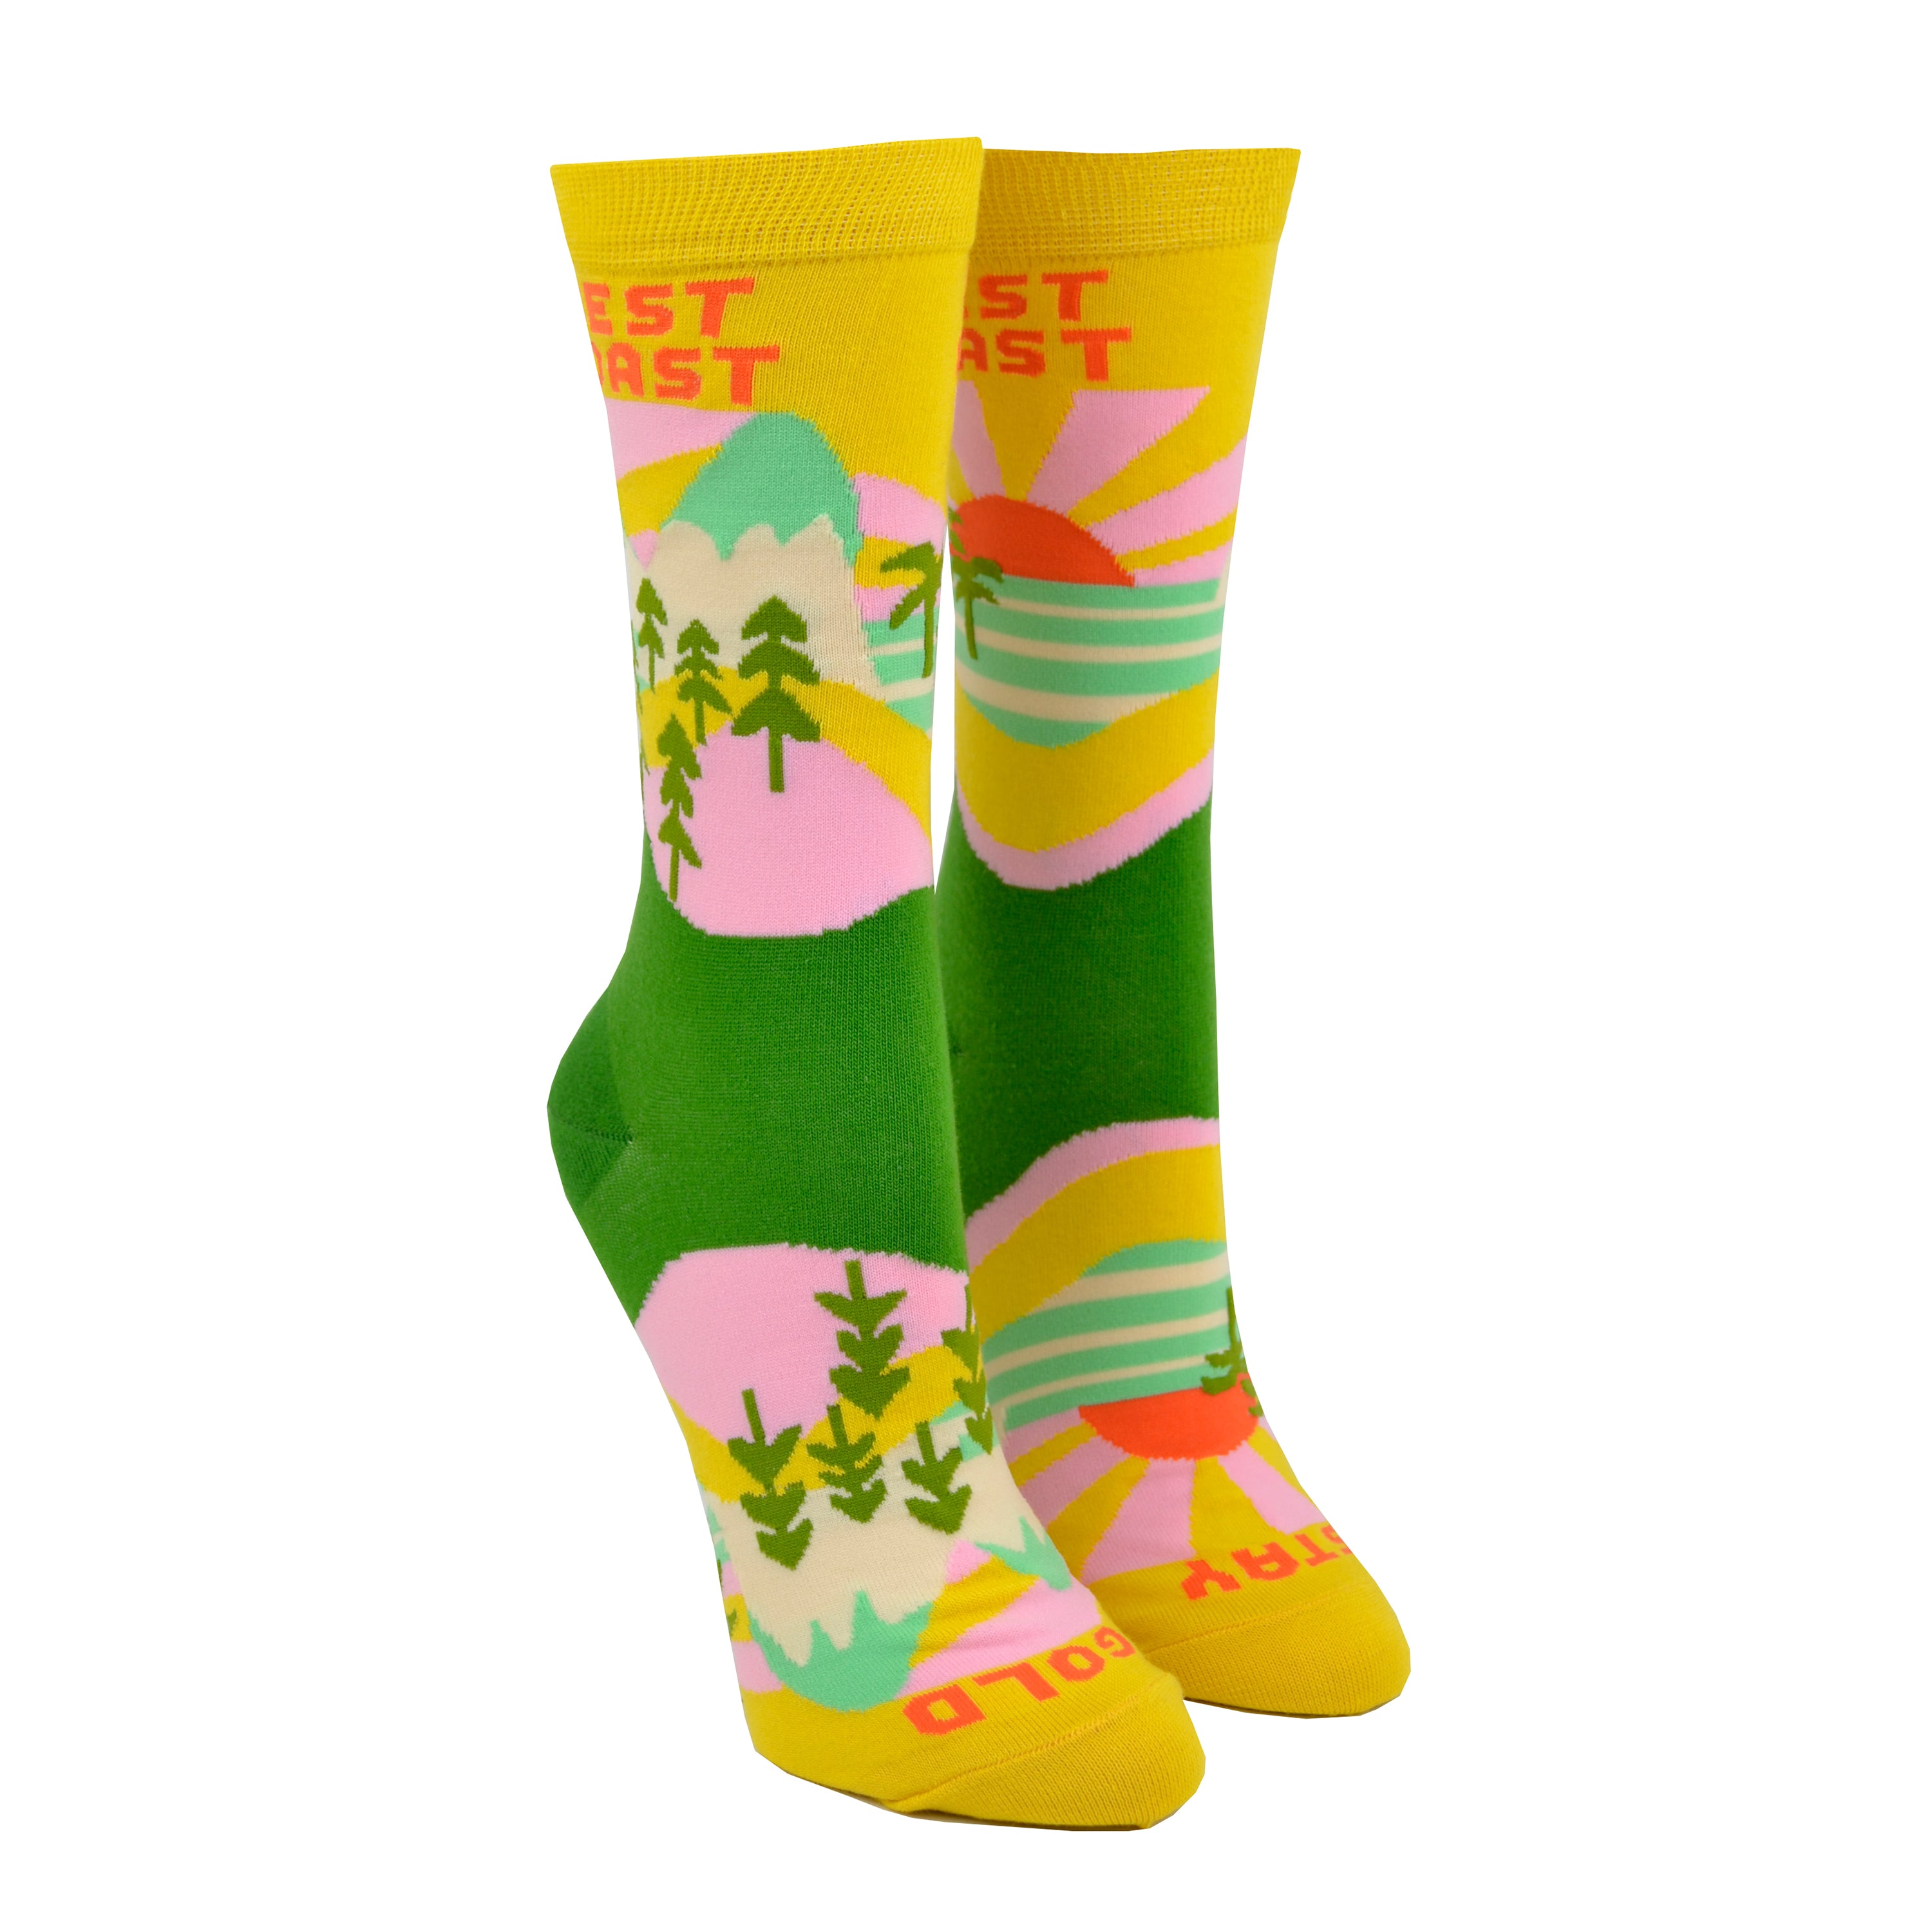 Shown on a leg form, these yellow cotton women's novelty crew socks by the brand Yellow Owl Workshop feature green trees, teal and white mountains, and pink clouds and say the words 